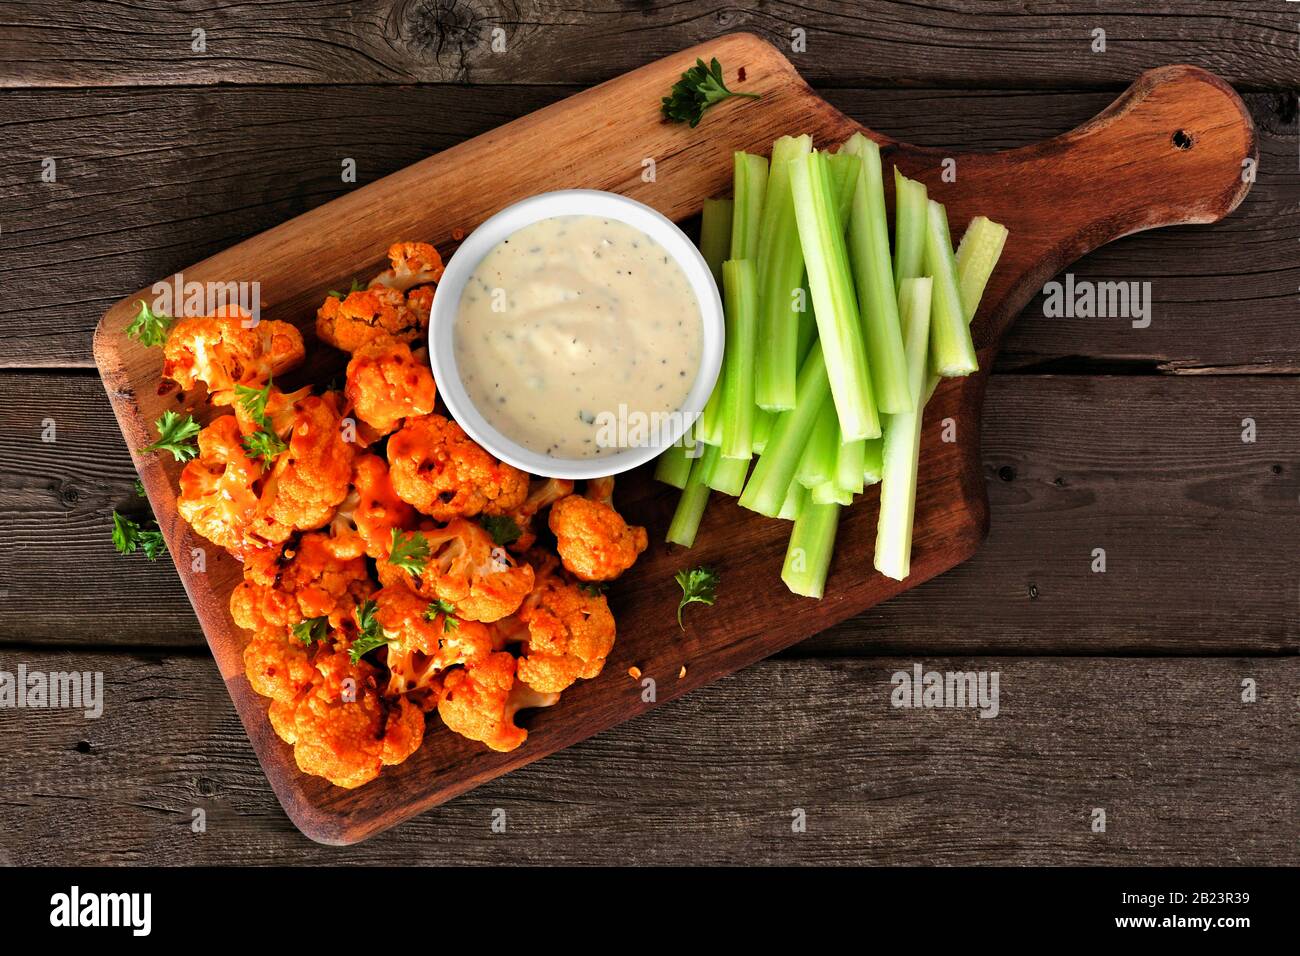 Cauliflower buffalo wings with celery and ranch dip. Top view a wood paddle board. Healthy eating, plant based meat substitute concept Stock Photo - Alamy